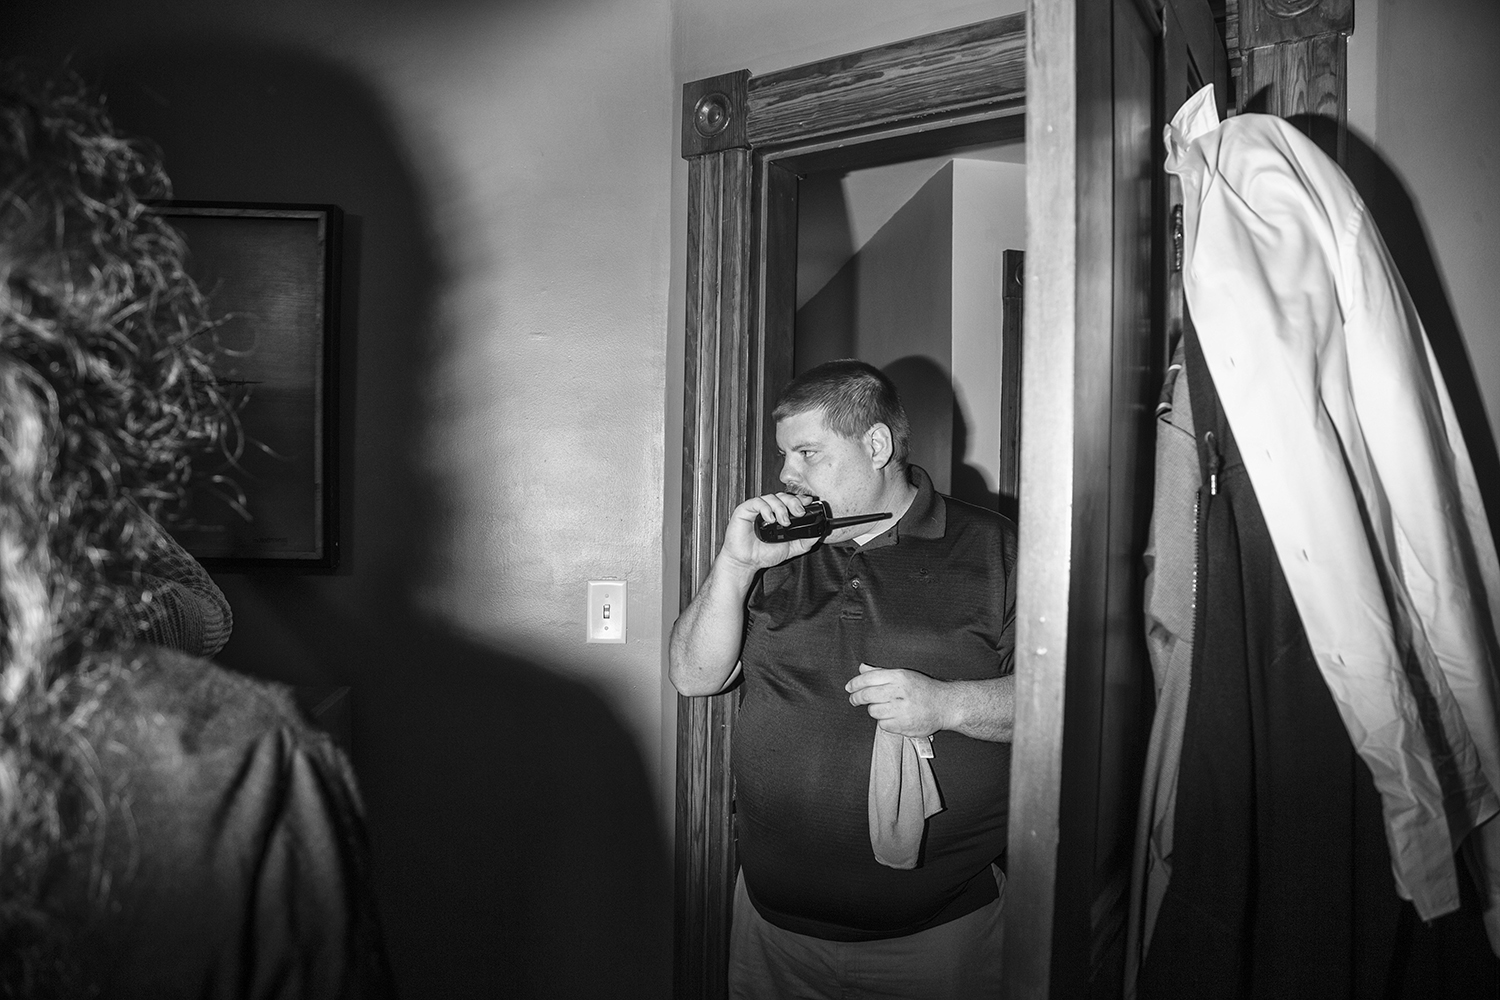 The Daily Iowan | Are ghosts real? Behind the scenes of a paranormal  investigation in a 125-year-old Iowa City home